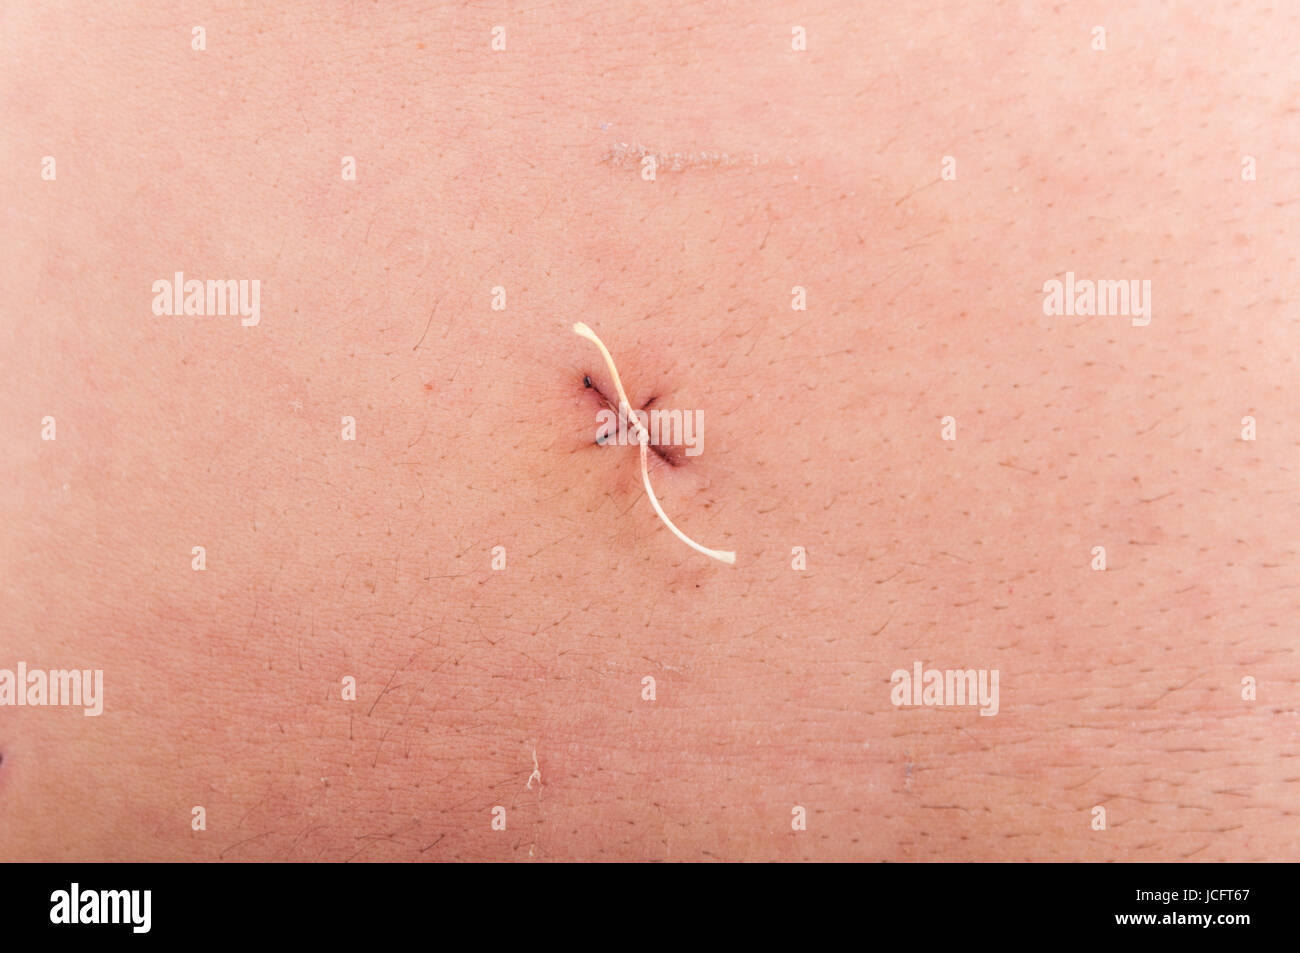 Closeup of abdominal stitch after laparoscopic surgery of gallbladder removal Stock Photo